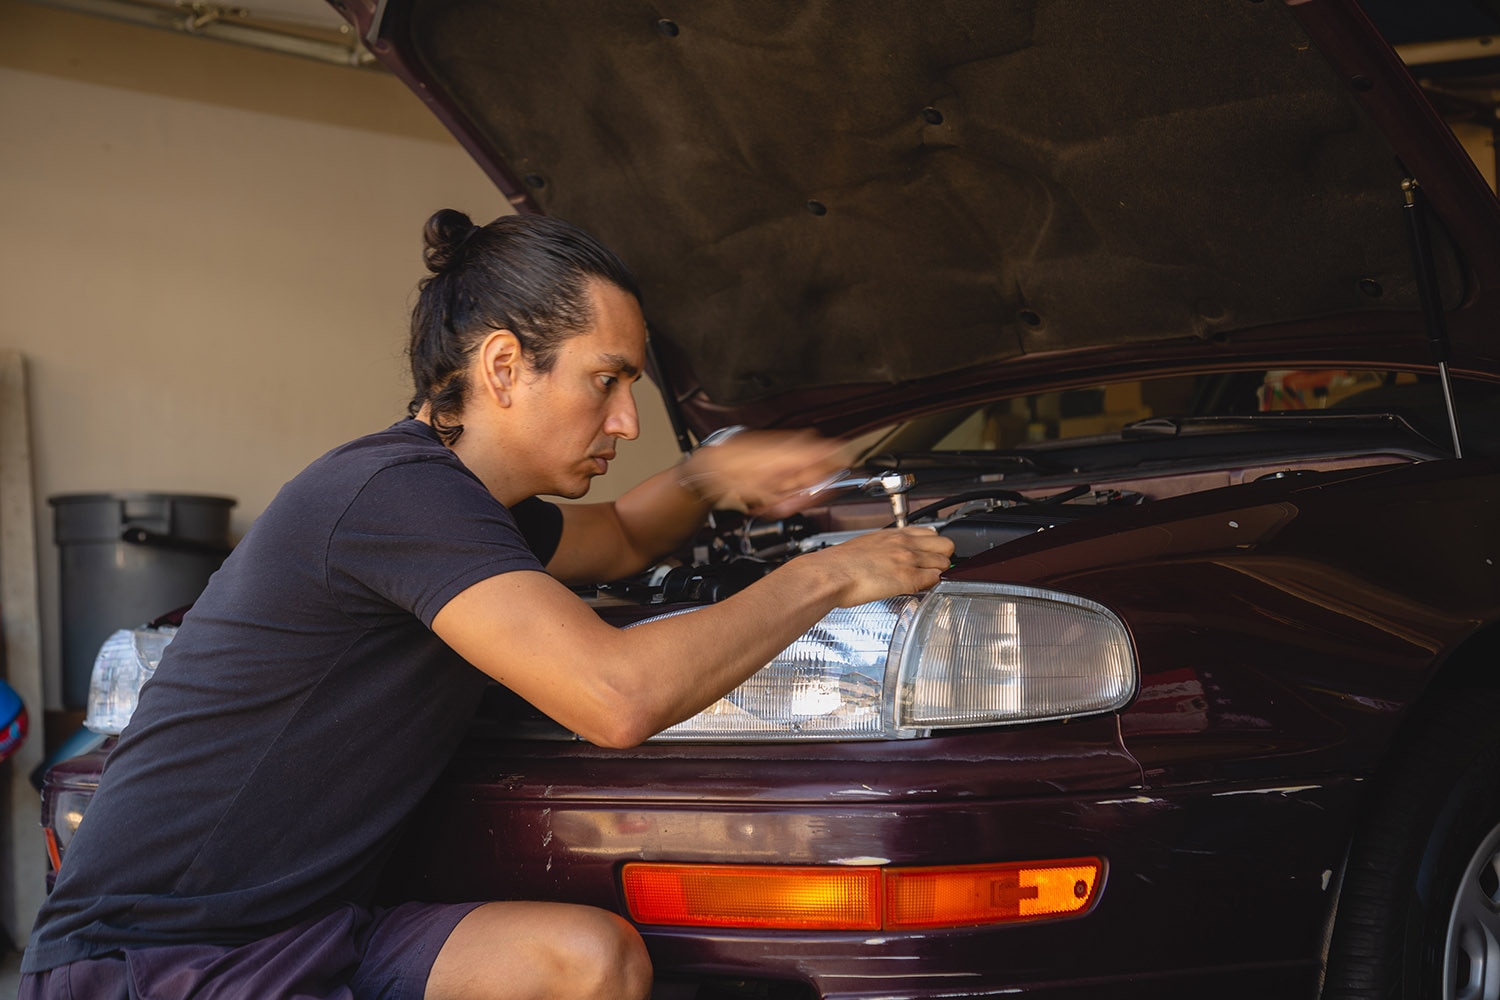 Man working on car with hood open